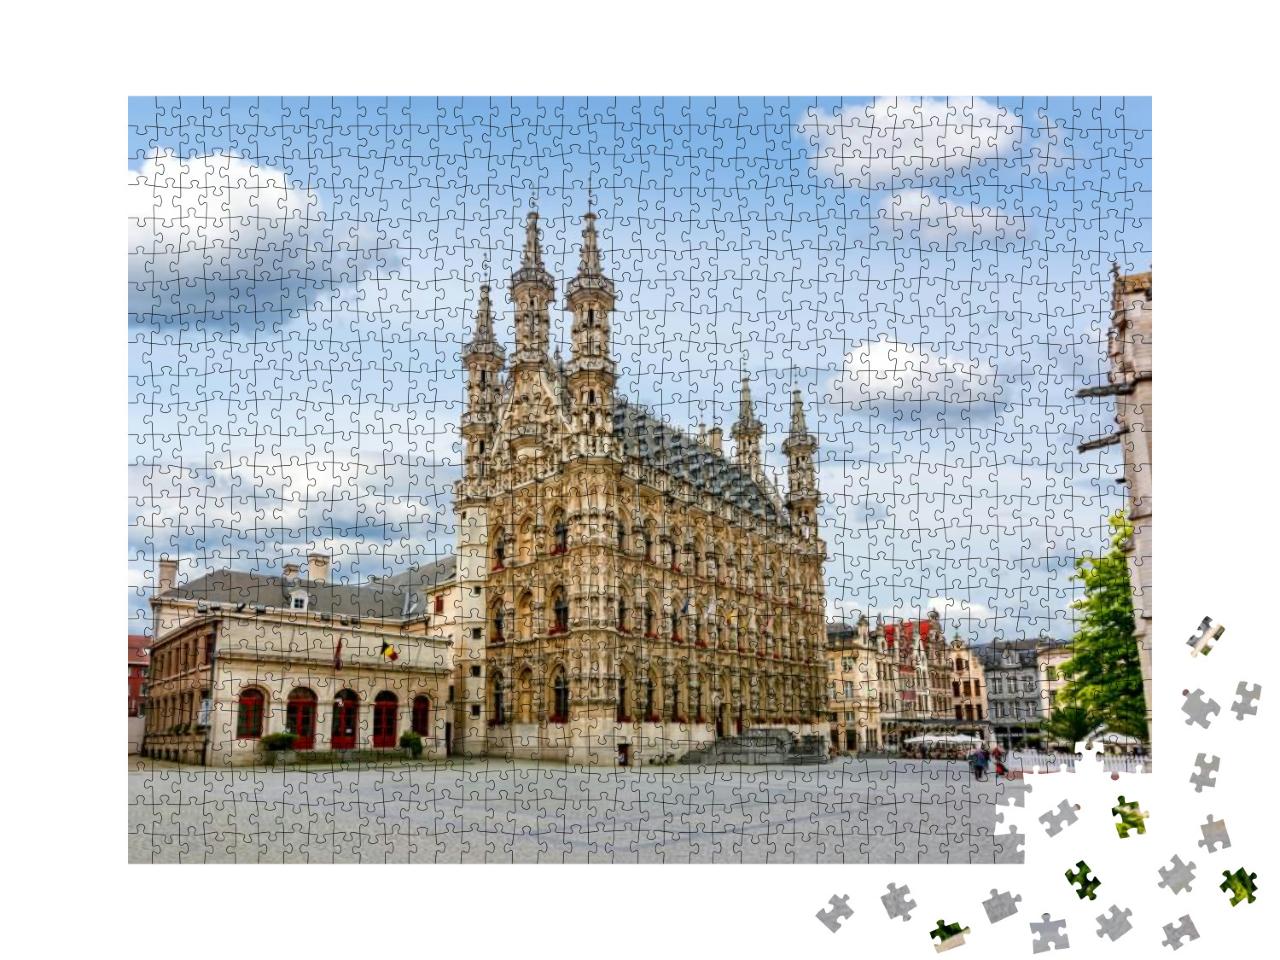 Town Hall in Center of Leuven, Belgium... Jigsaw Puzzle with 1000 pieces